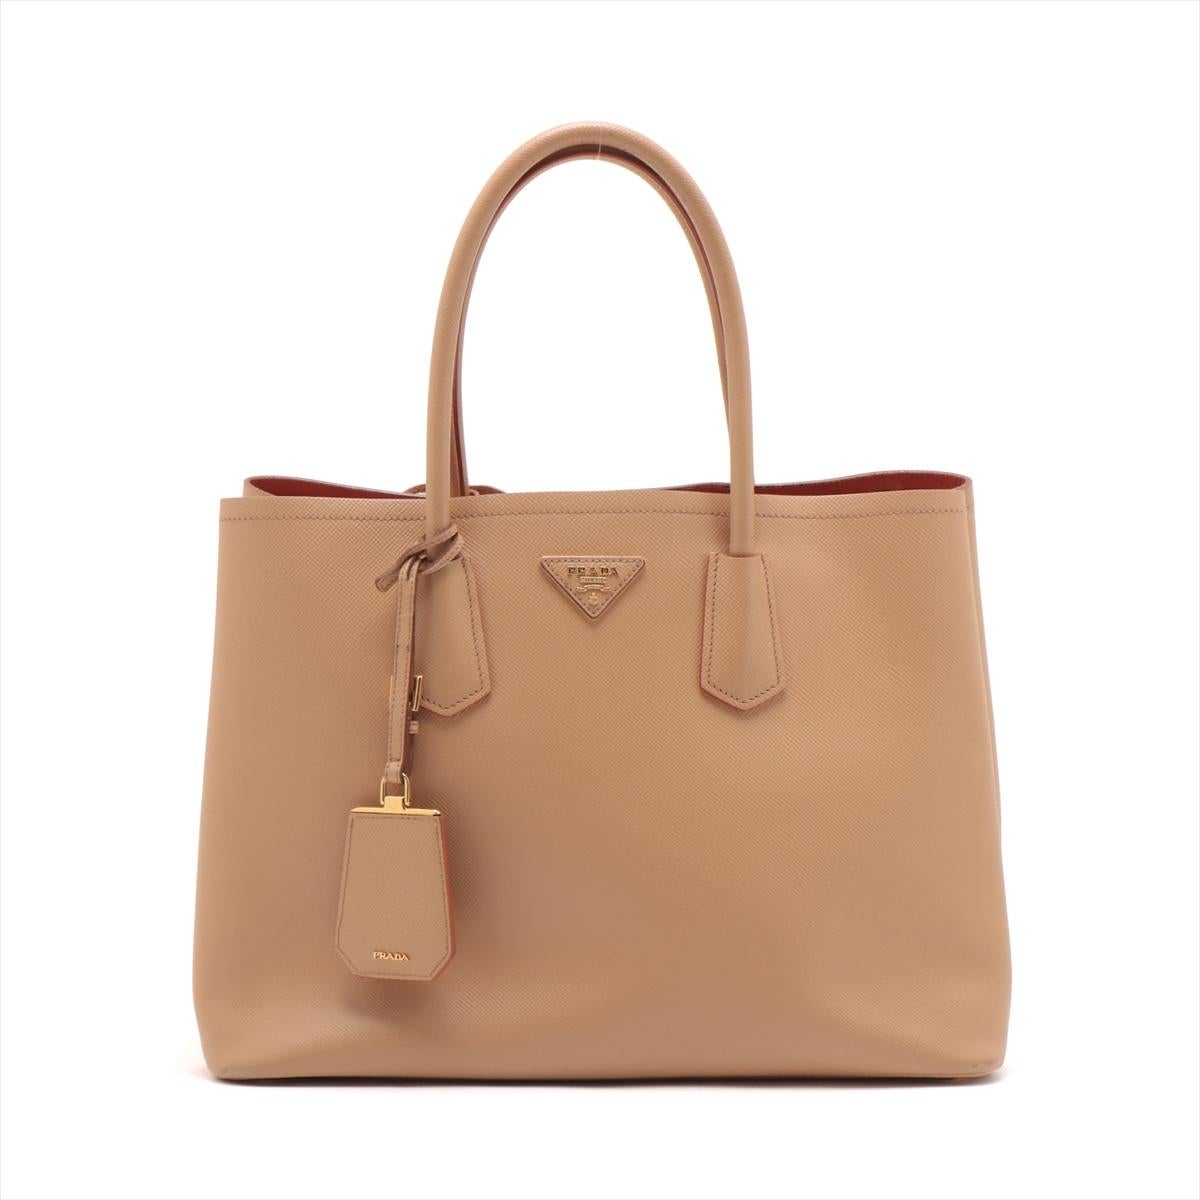 The Prada Saffiano Cuir Two-Way Tote Bag in Beige is a versatile and luxurious accessory that effortlessly combines style and functionality. Crafted from the finest Saffiano leather, known for its durability and distinctive crosshatch texture, the